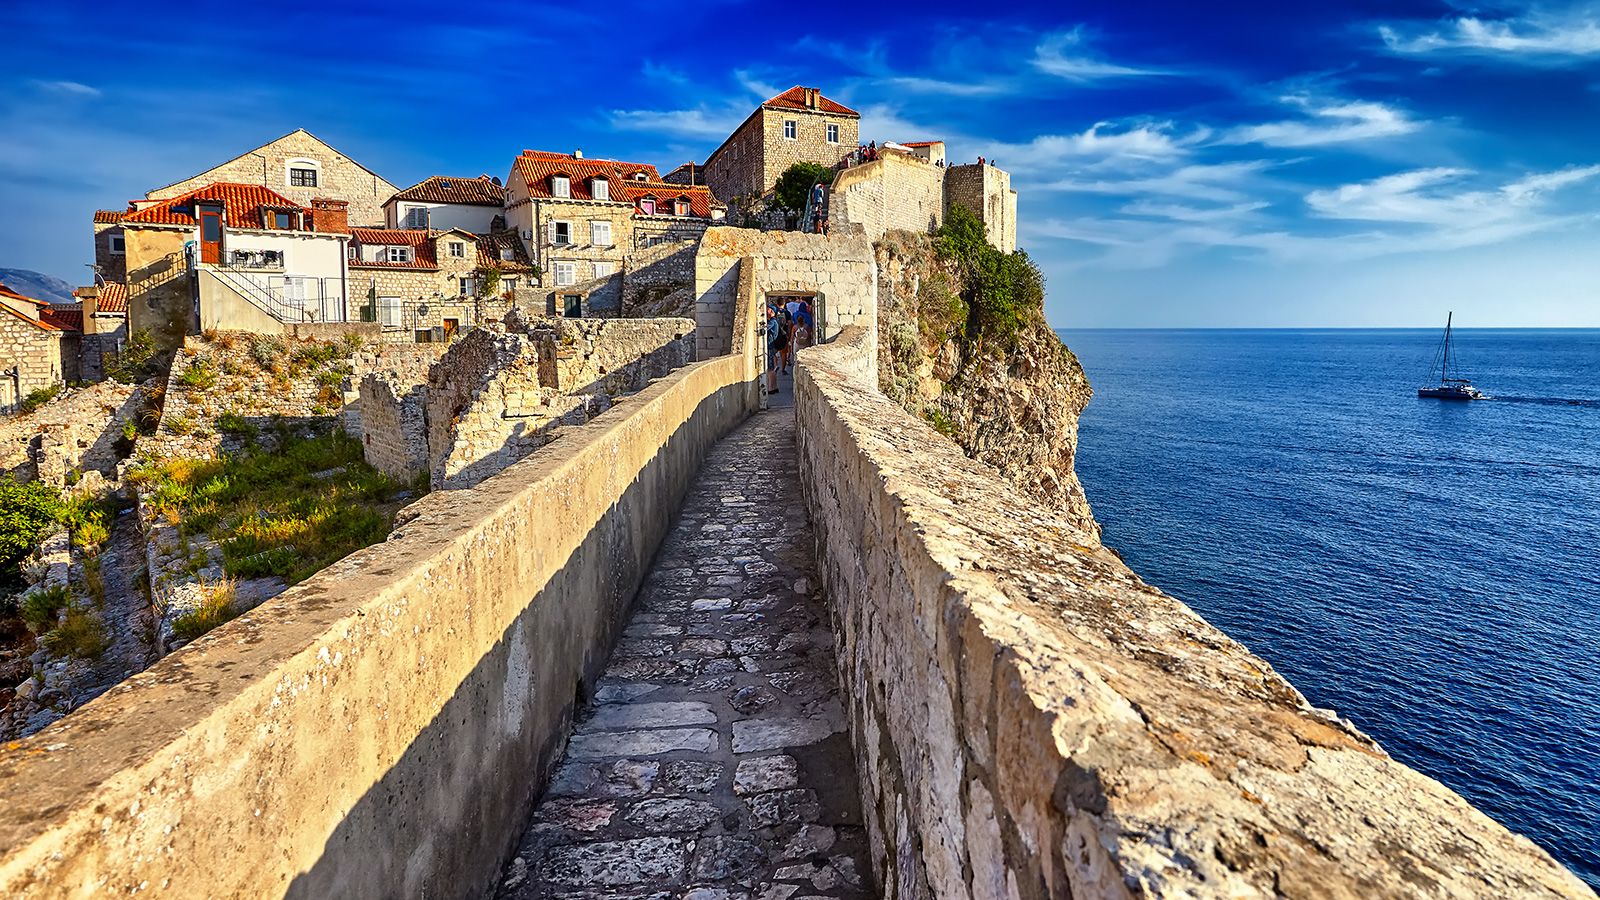 <strong>Dubrovnik:</strong> Still want to go to Dubrovnik? You can avoid the heaviest crowds by exploring the old town before and after the daily high tide of cruise ship passengers. Walking the polished limestone streets is especially pleasant at dawn or late evening.